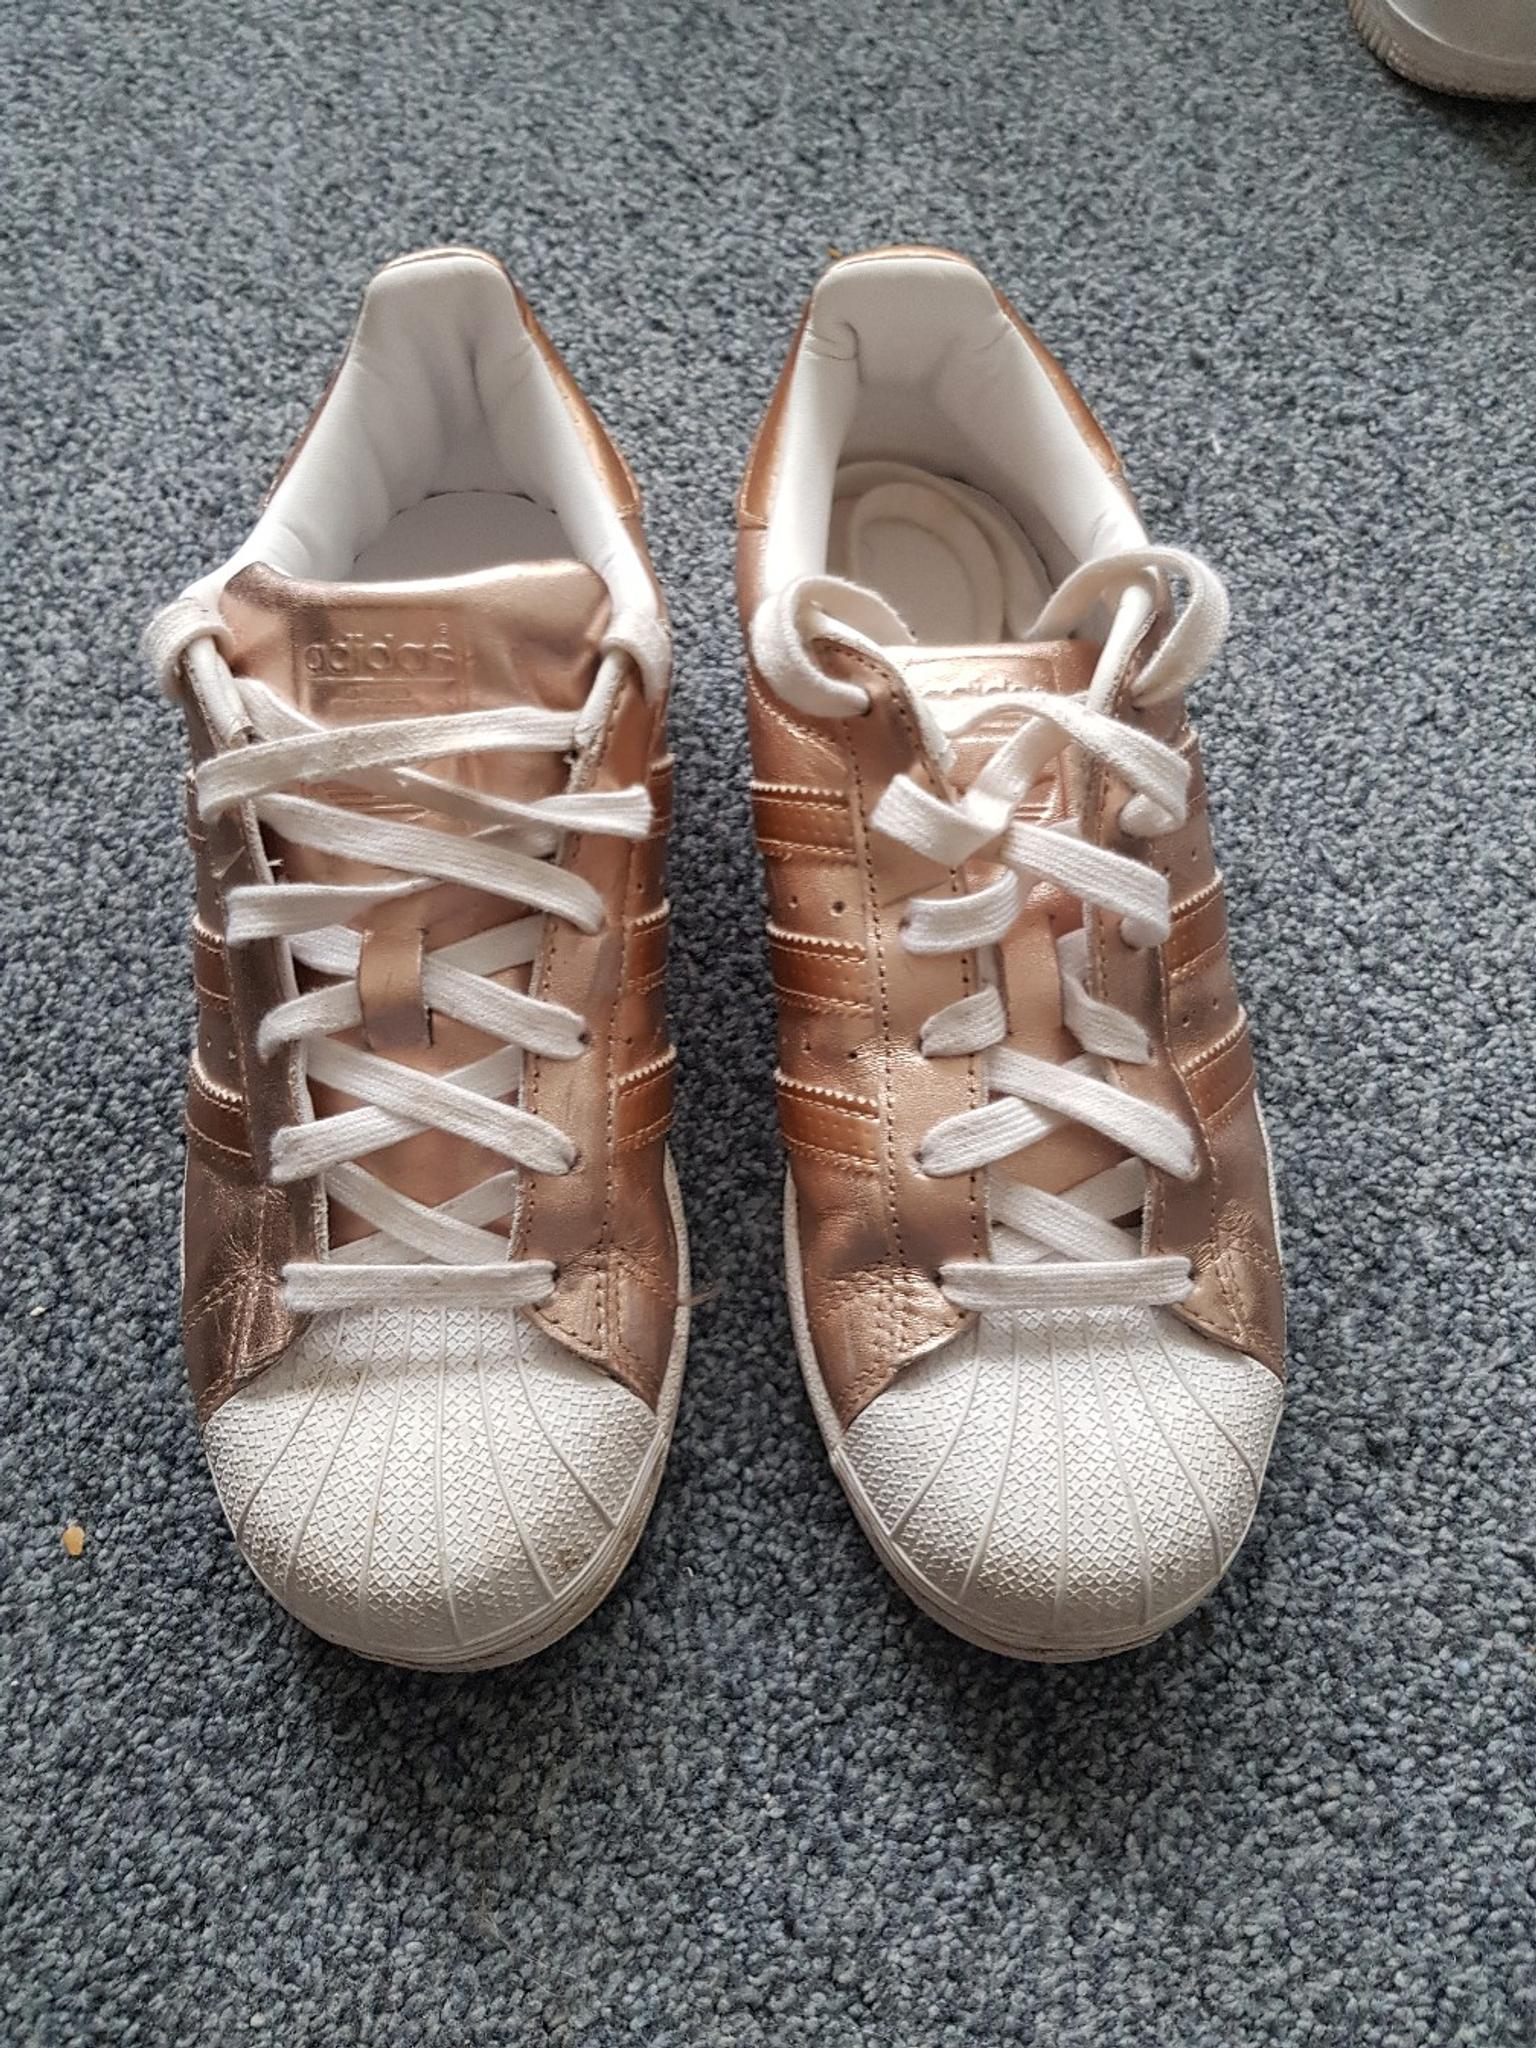 adidas limited edition rose gold